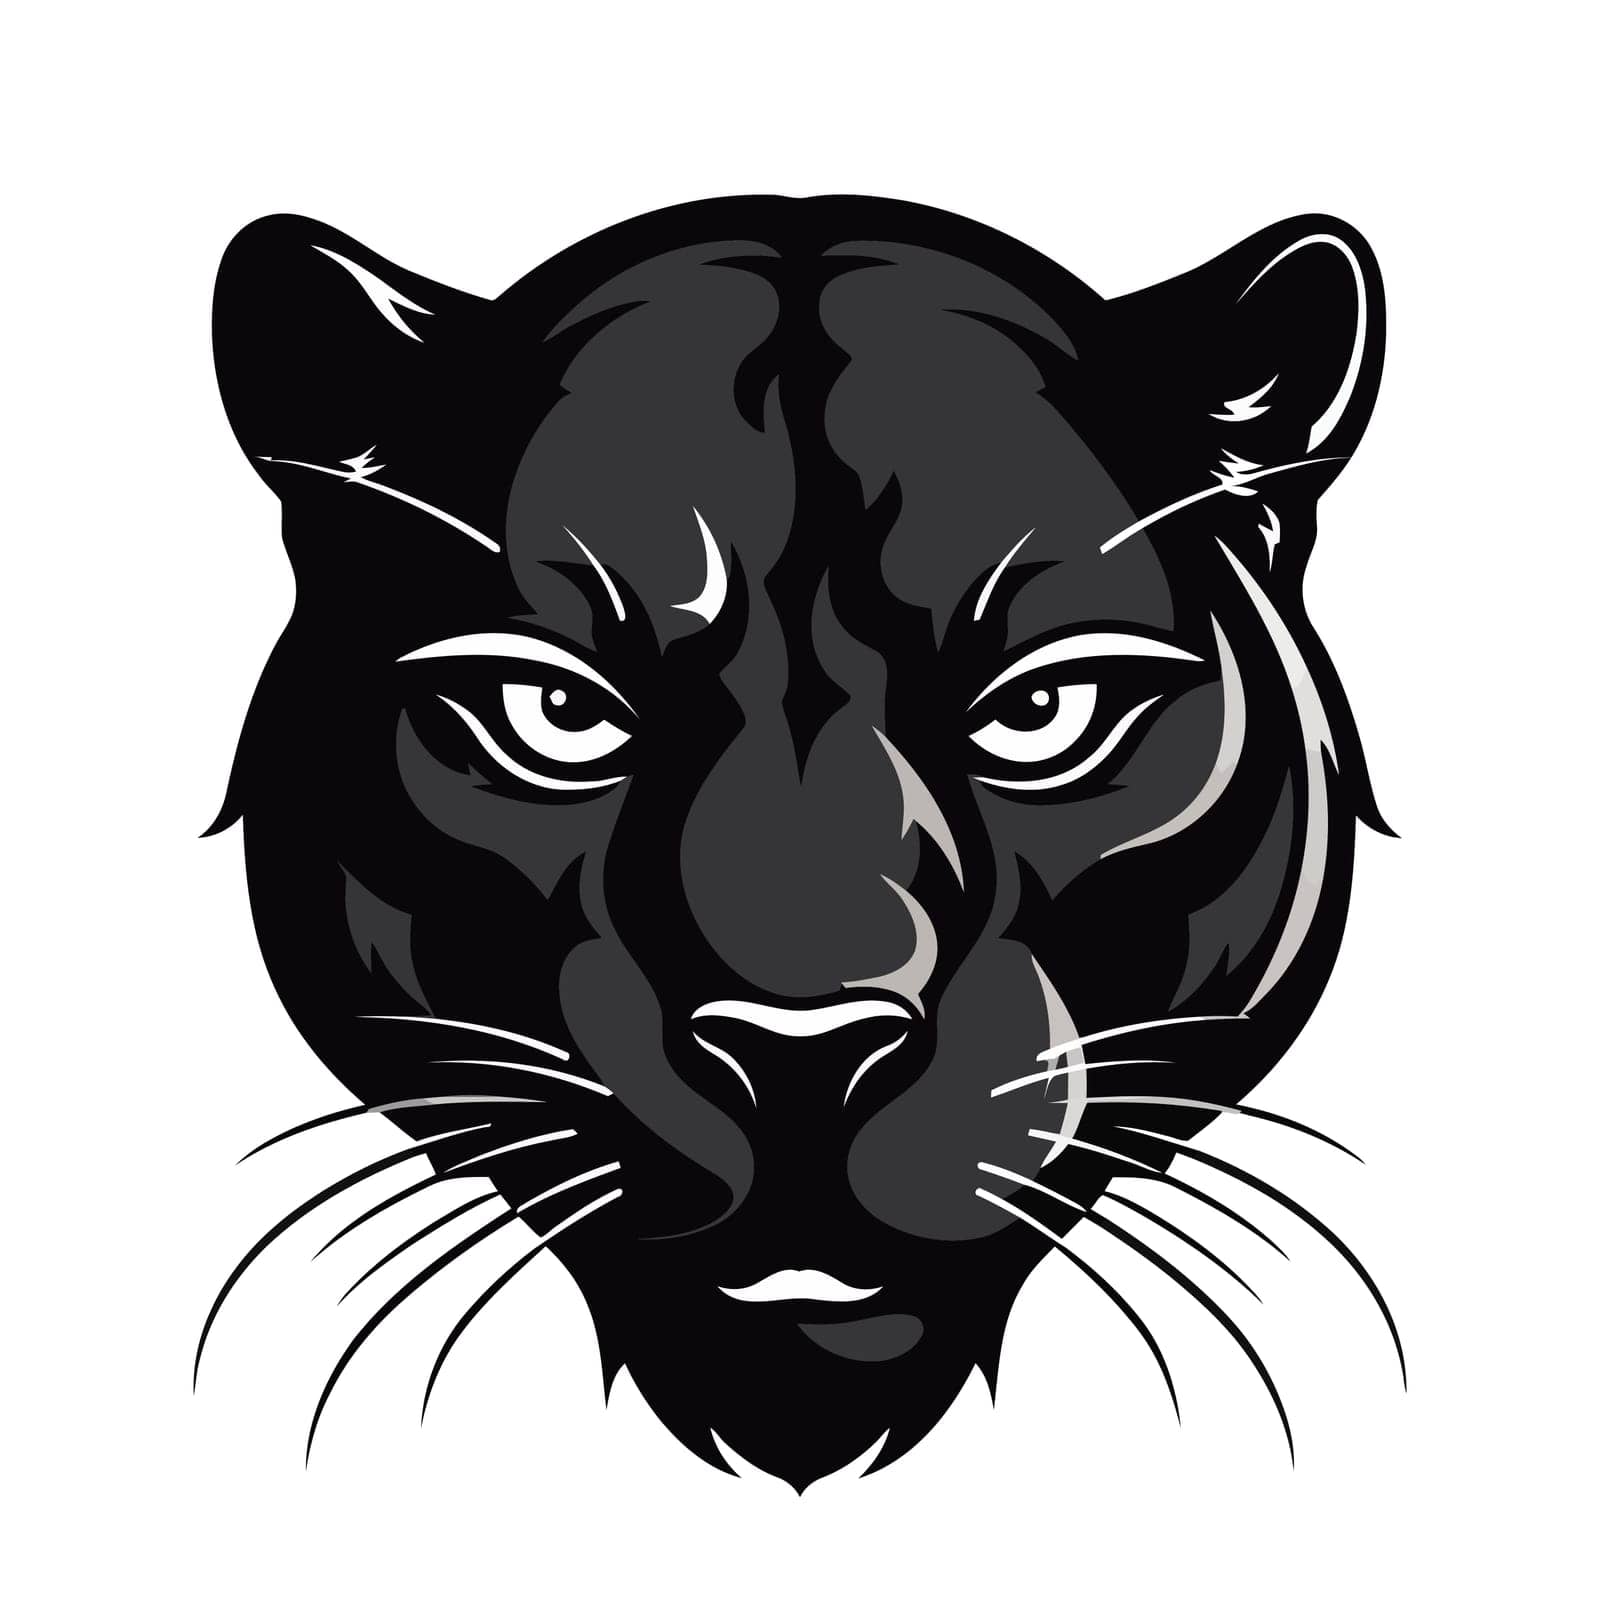 Panther head logo design. Abstract drawing panther face. Cute panther face isolated. Vector illustration